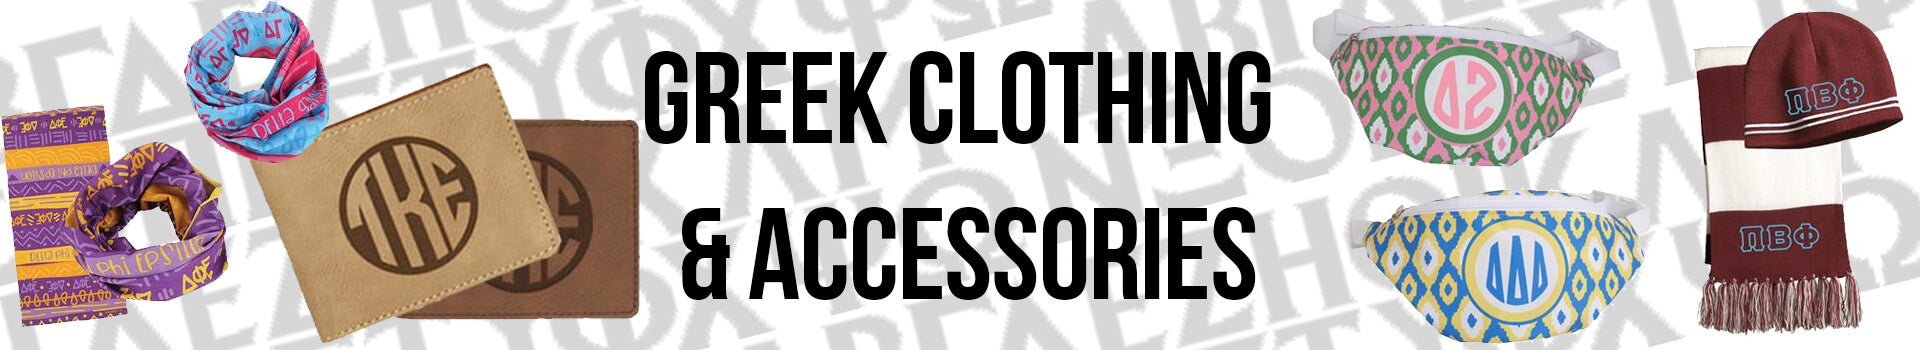 Custom Greek Clothing and Accessories for Fraternities and Sororities